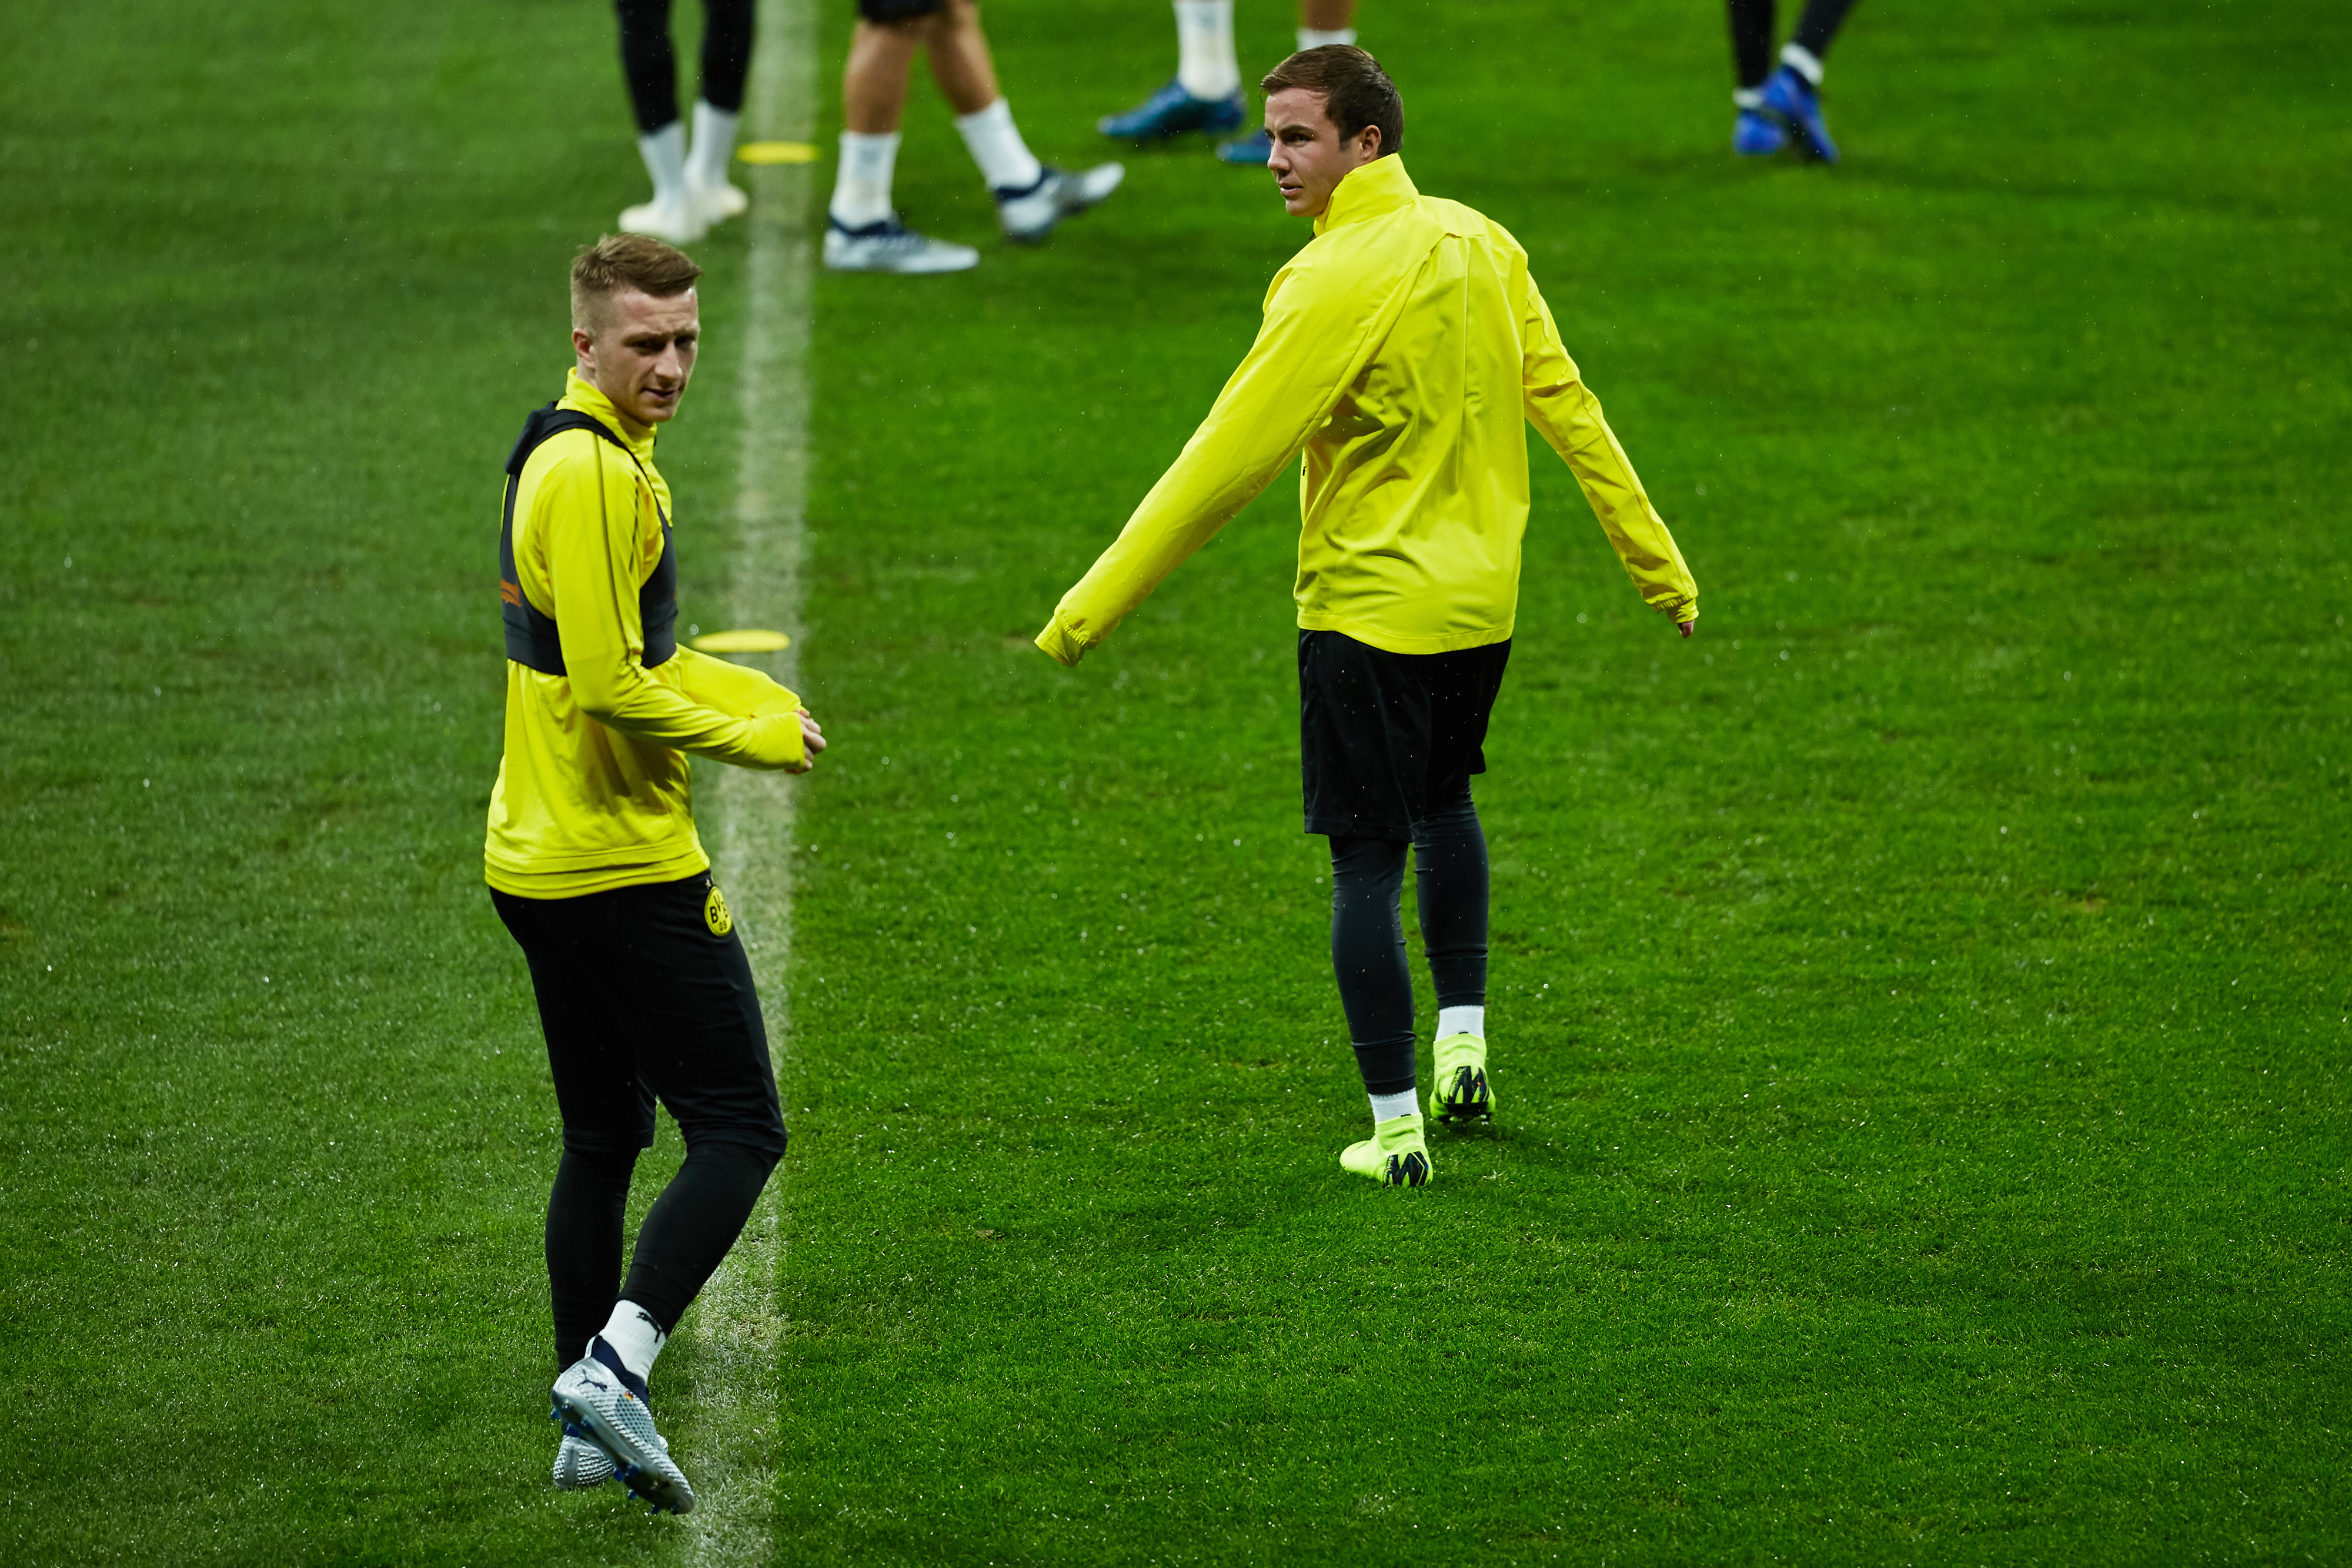 MADRID, SPAIN - NOVEMBER 05: Marco Reus (L) of Borussia Dortmund and his teammate Mario Gotze (R) access to the pitch during a training session ahead of their UEFA Champions League match against€© Atletico de Madrid at Estadio Wanda Metropolitano on November 05, 2018 in Madrid, Spain. (Photo by Gonzalo Arroyo Moreno/Getty Images)